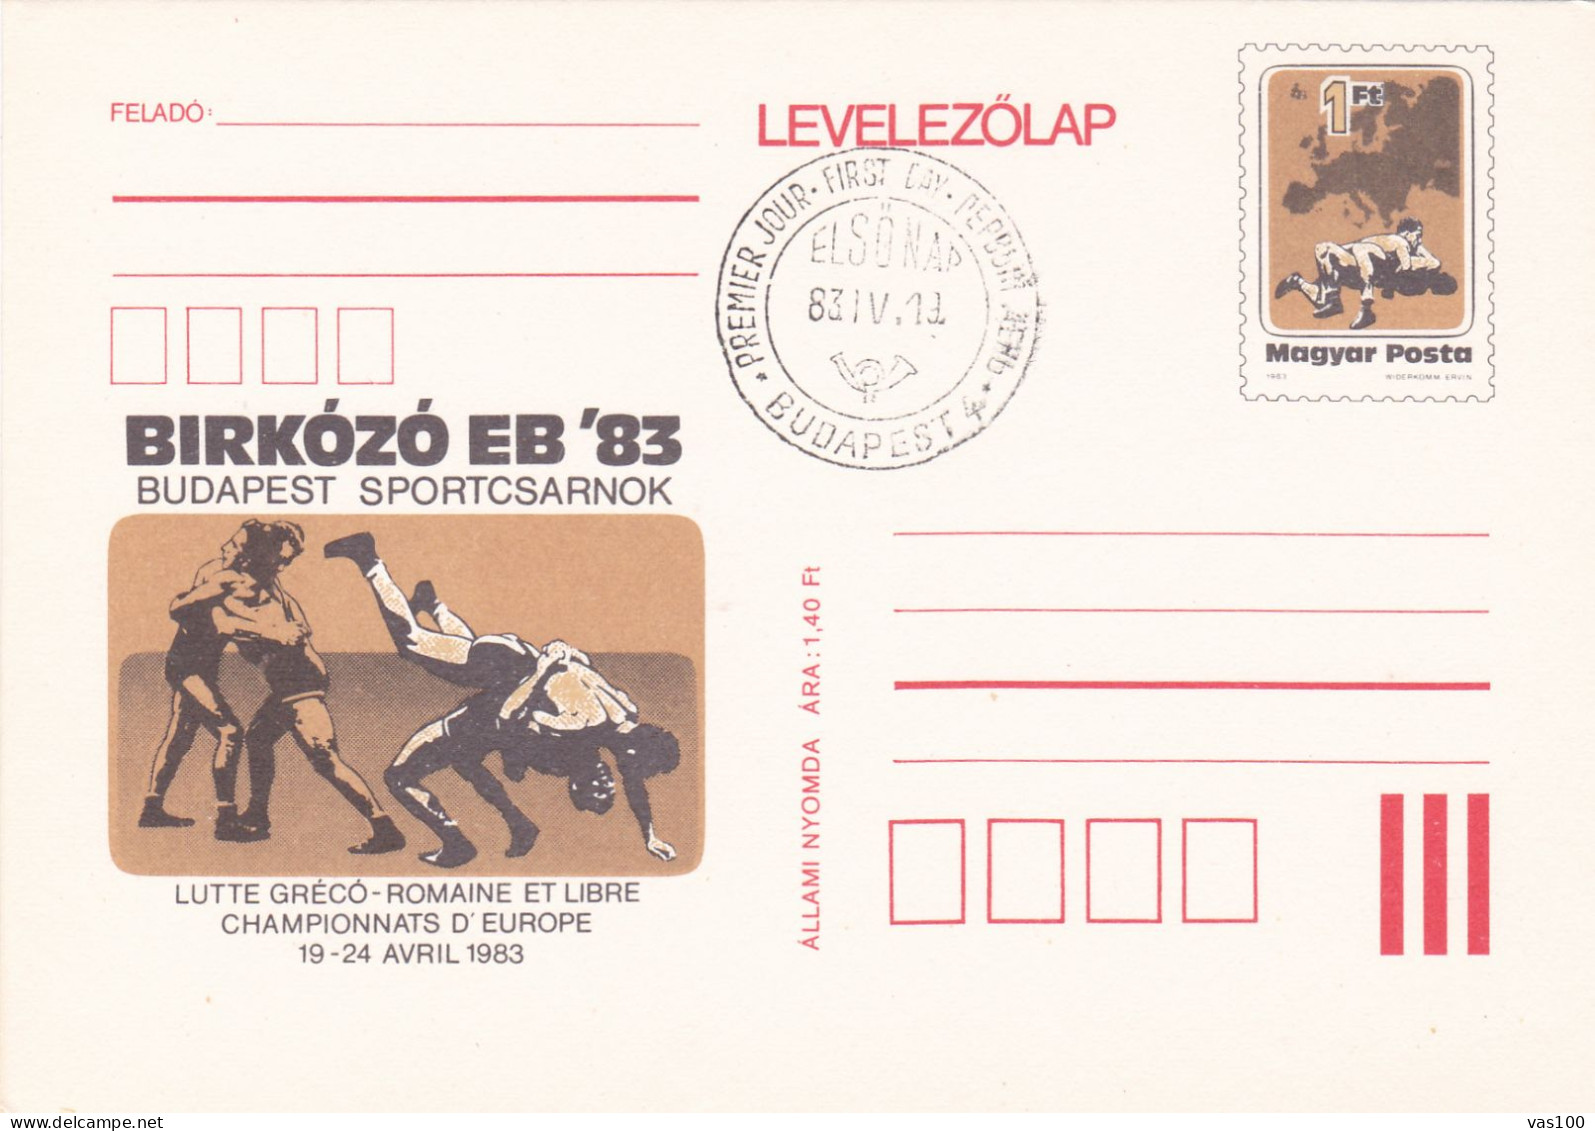 LUTTE GRECO-ROMAINE ET LIBERE, POST CARD STATIONERY, OBLITERATION  FDC 1983, ROMANIA - Lutte